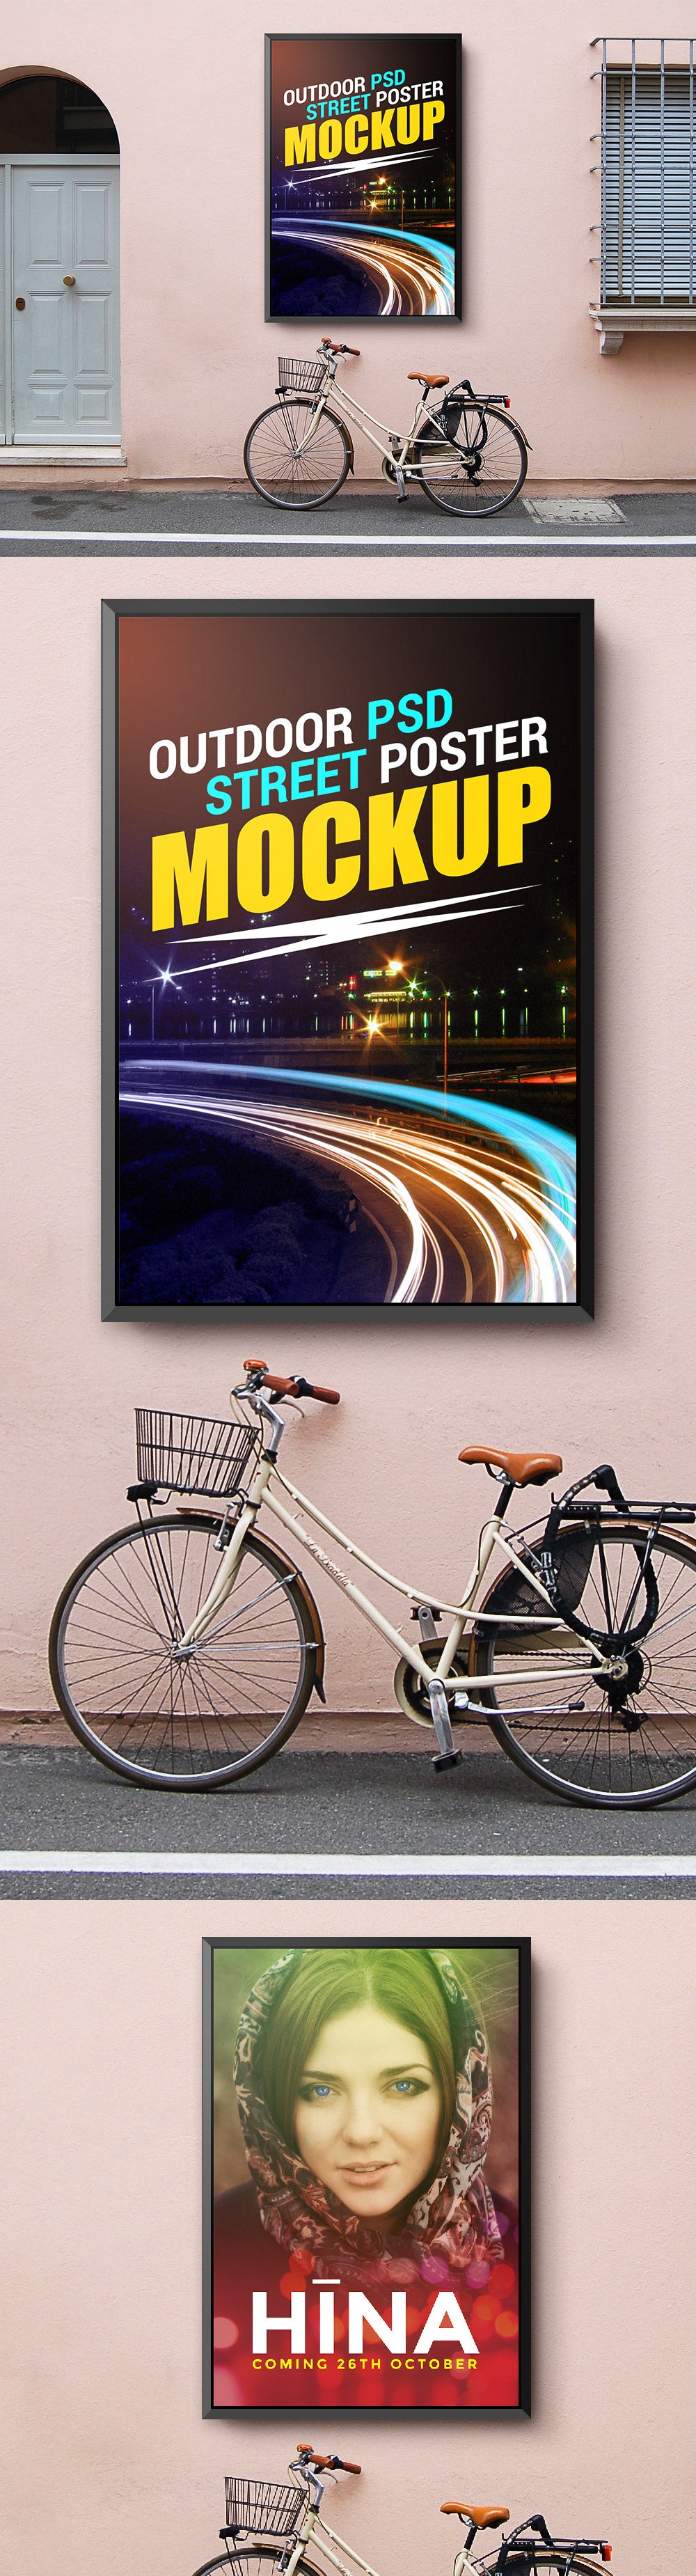 Download Free Outdoor Street Poster Frame Mockup With Bicycle Door And Window Creativebooster